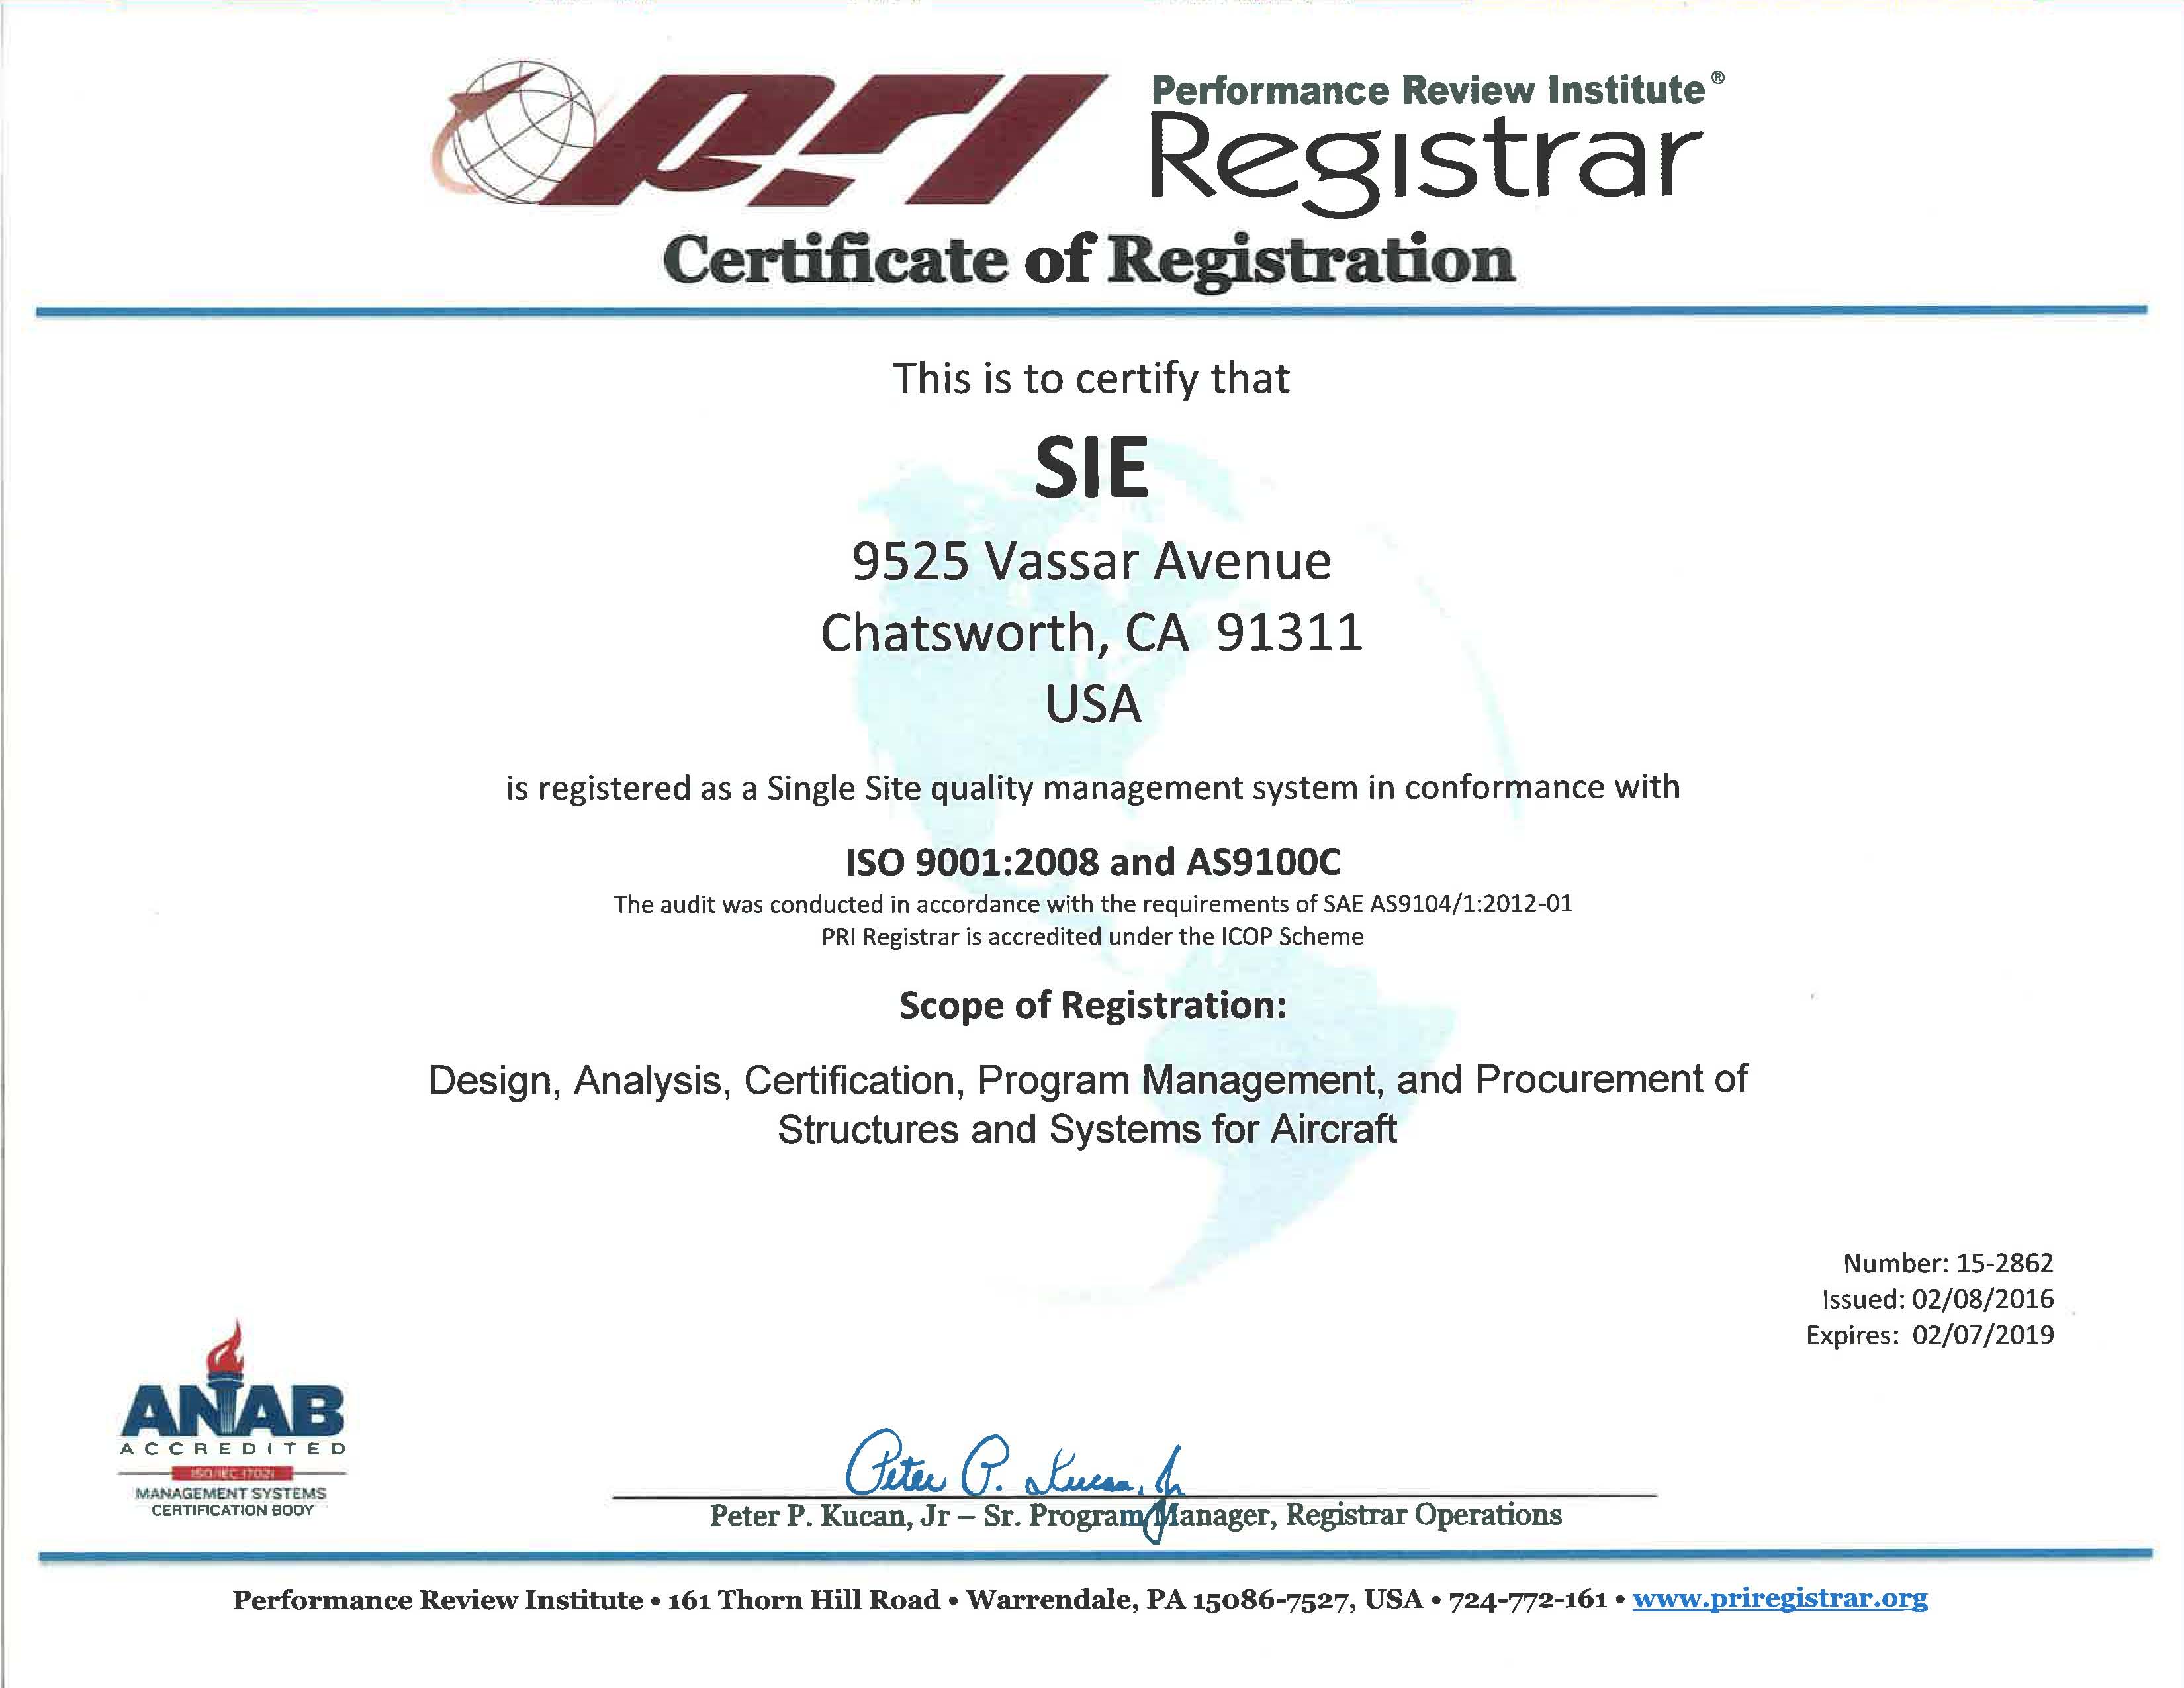 Image of image of the AS9100 Certificate